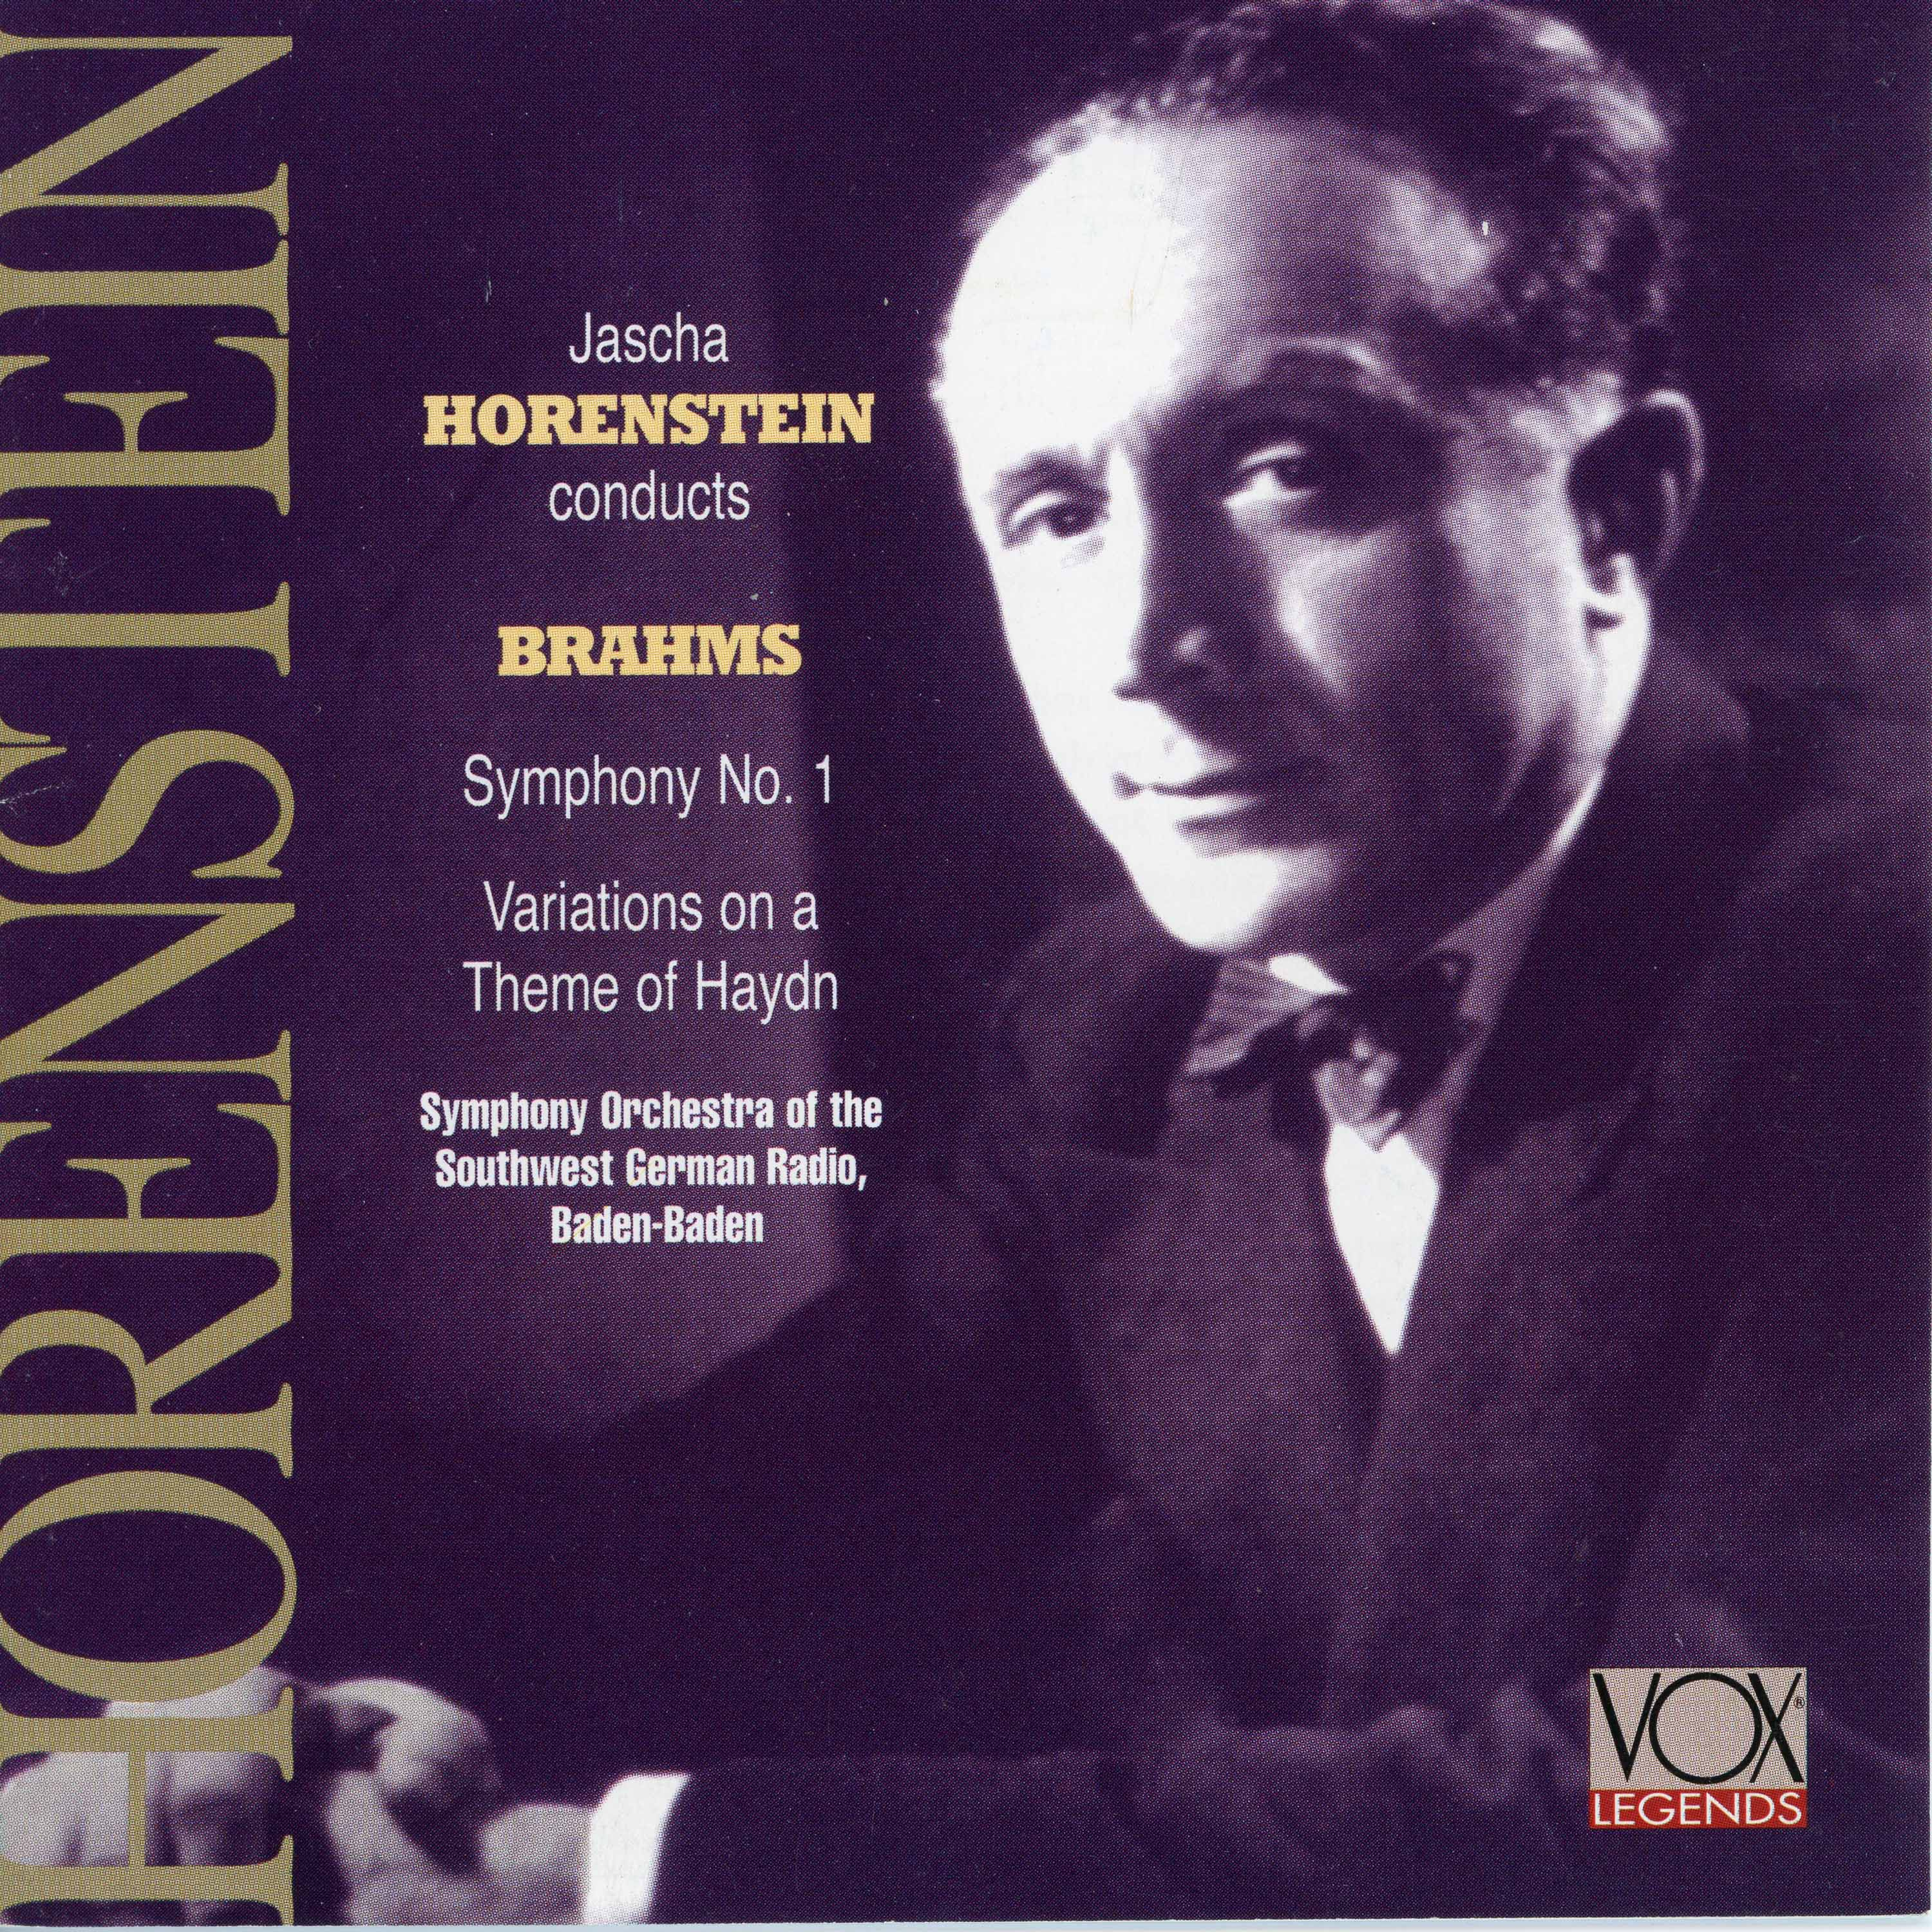 Variations on a Theme by Haydn, Op. 56a "St. Anthony Variations":Variations on a Theme by Haydn, Op. 56a "St. Anthony Variations": Var. 1, Poco più animato